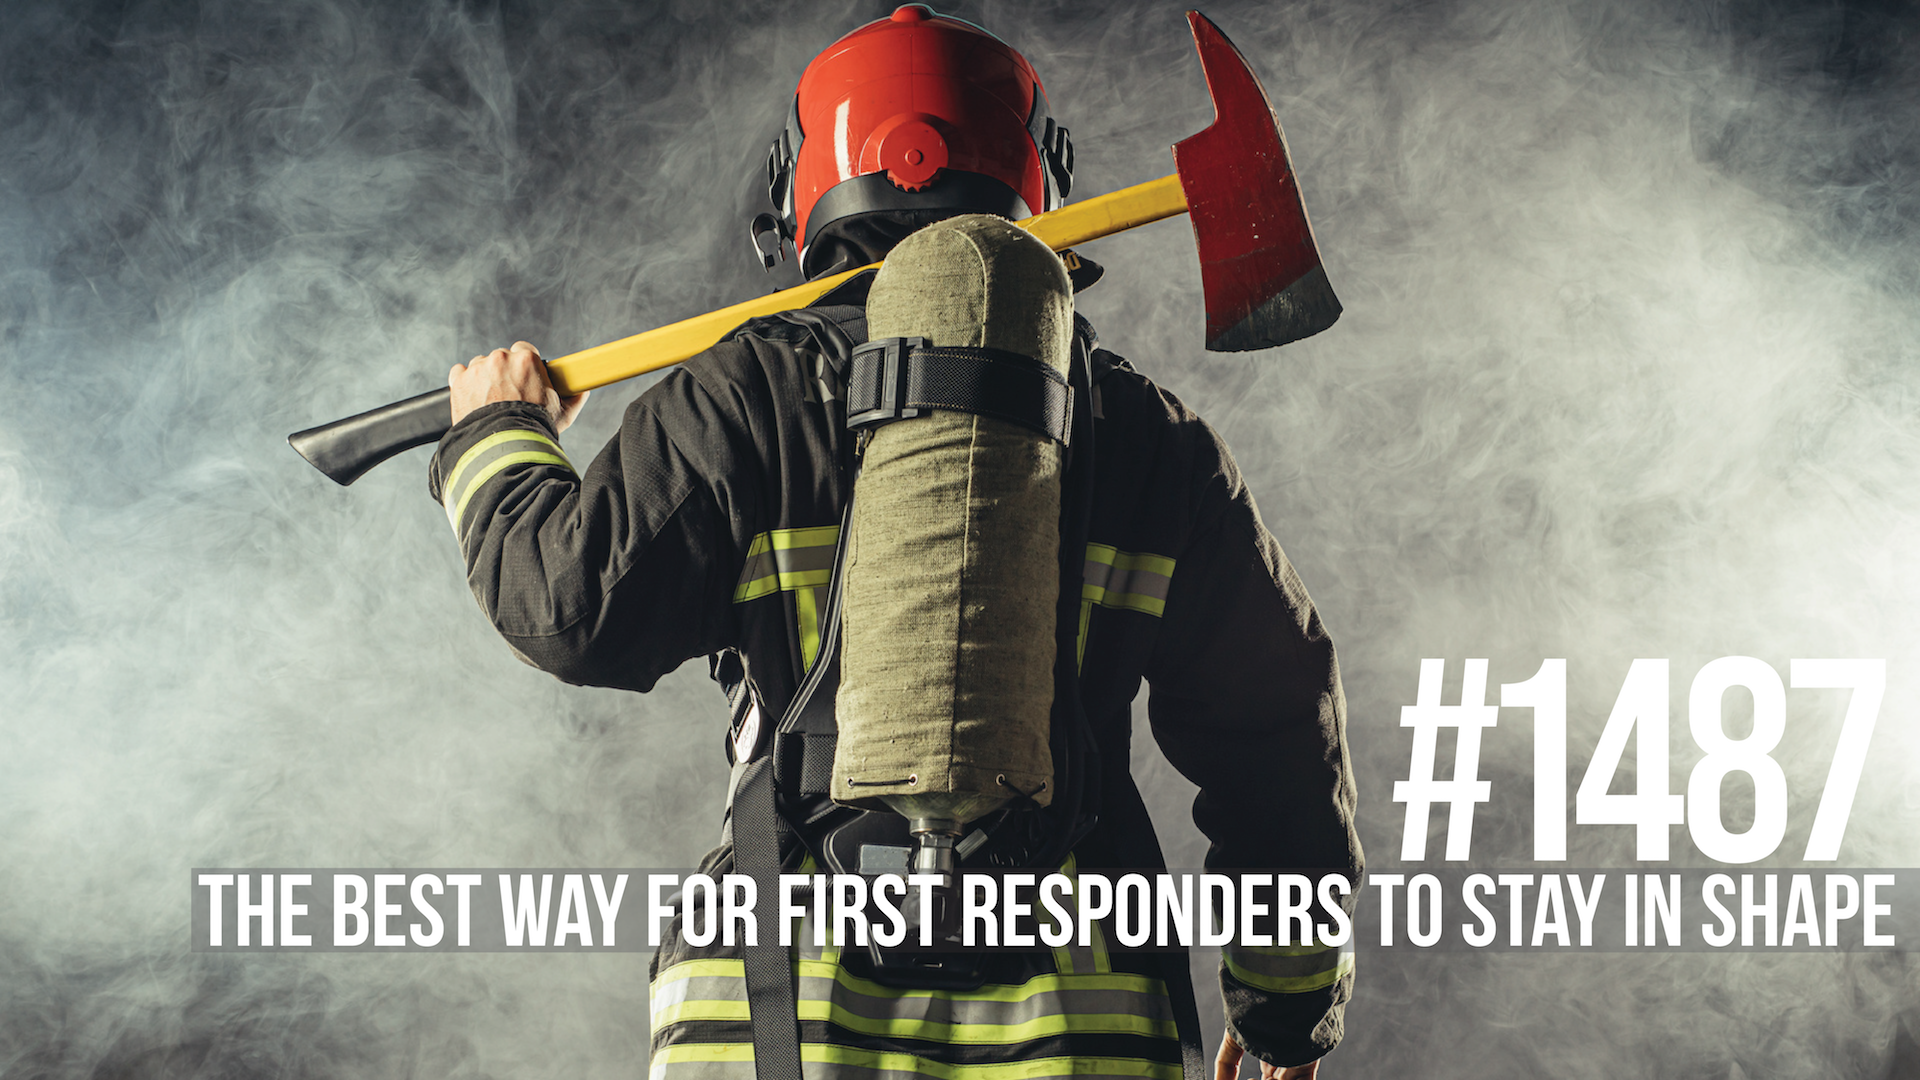 1487: The Best Way for First Responders to Stay in Shape